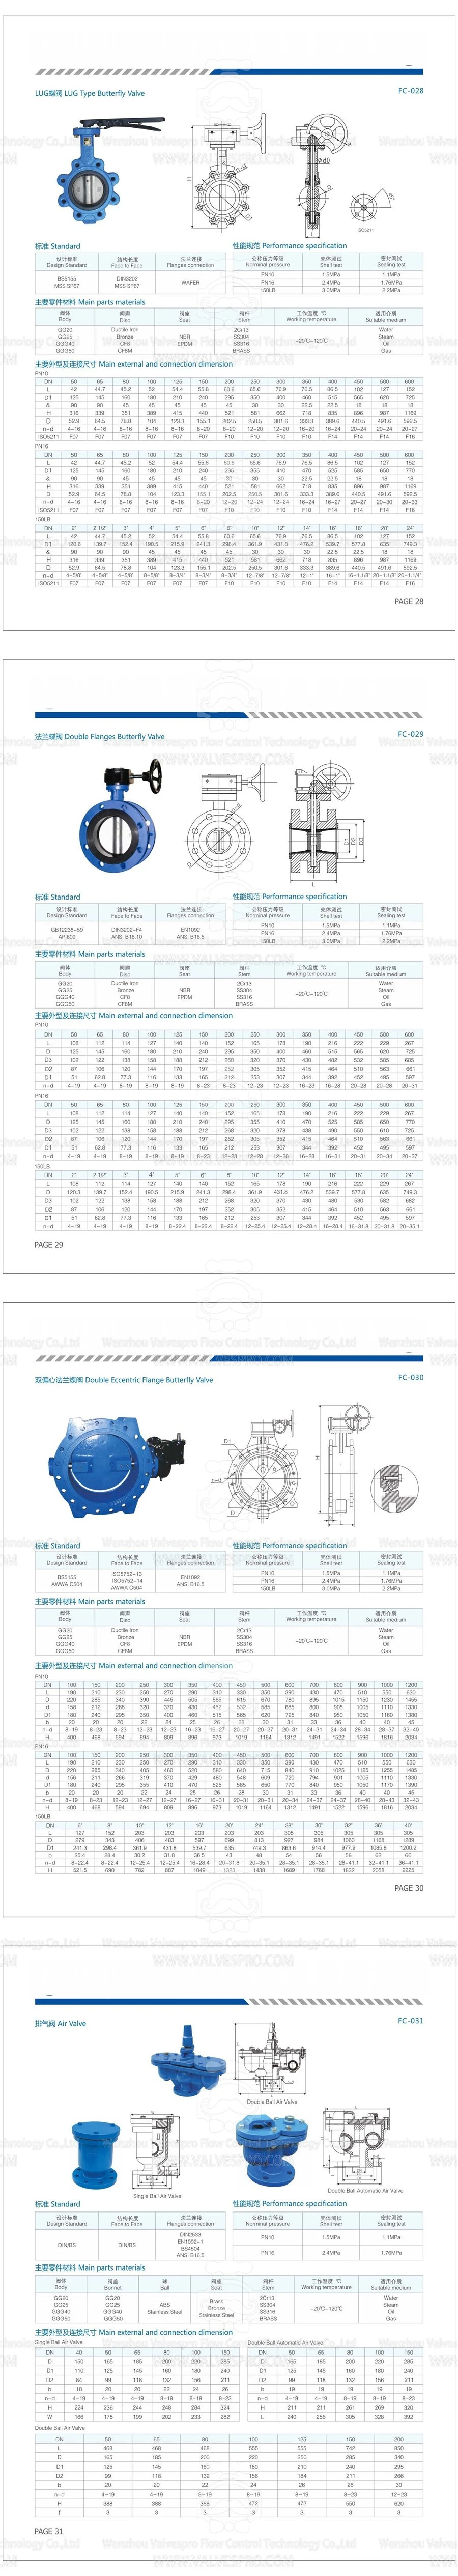 DIN3202-F1 Pn16 Cast Iron Gg25 S-Pattern Globe Valve for Water